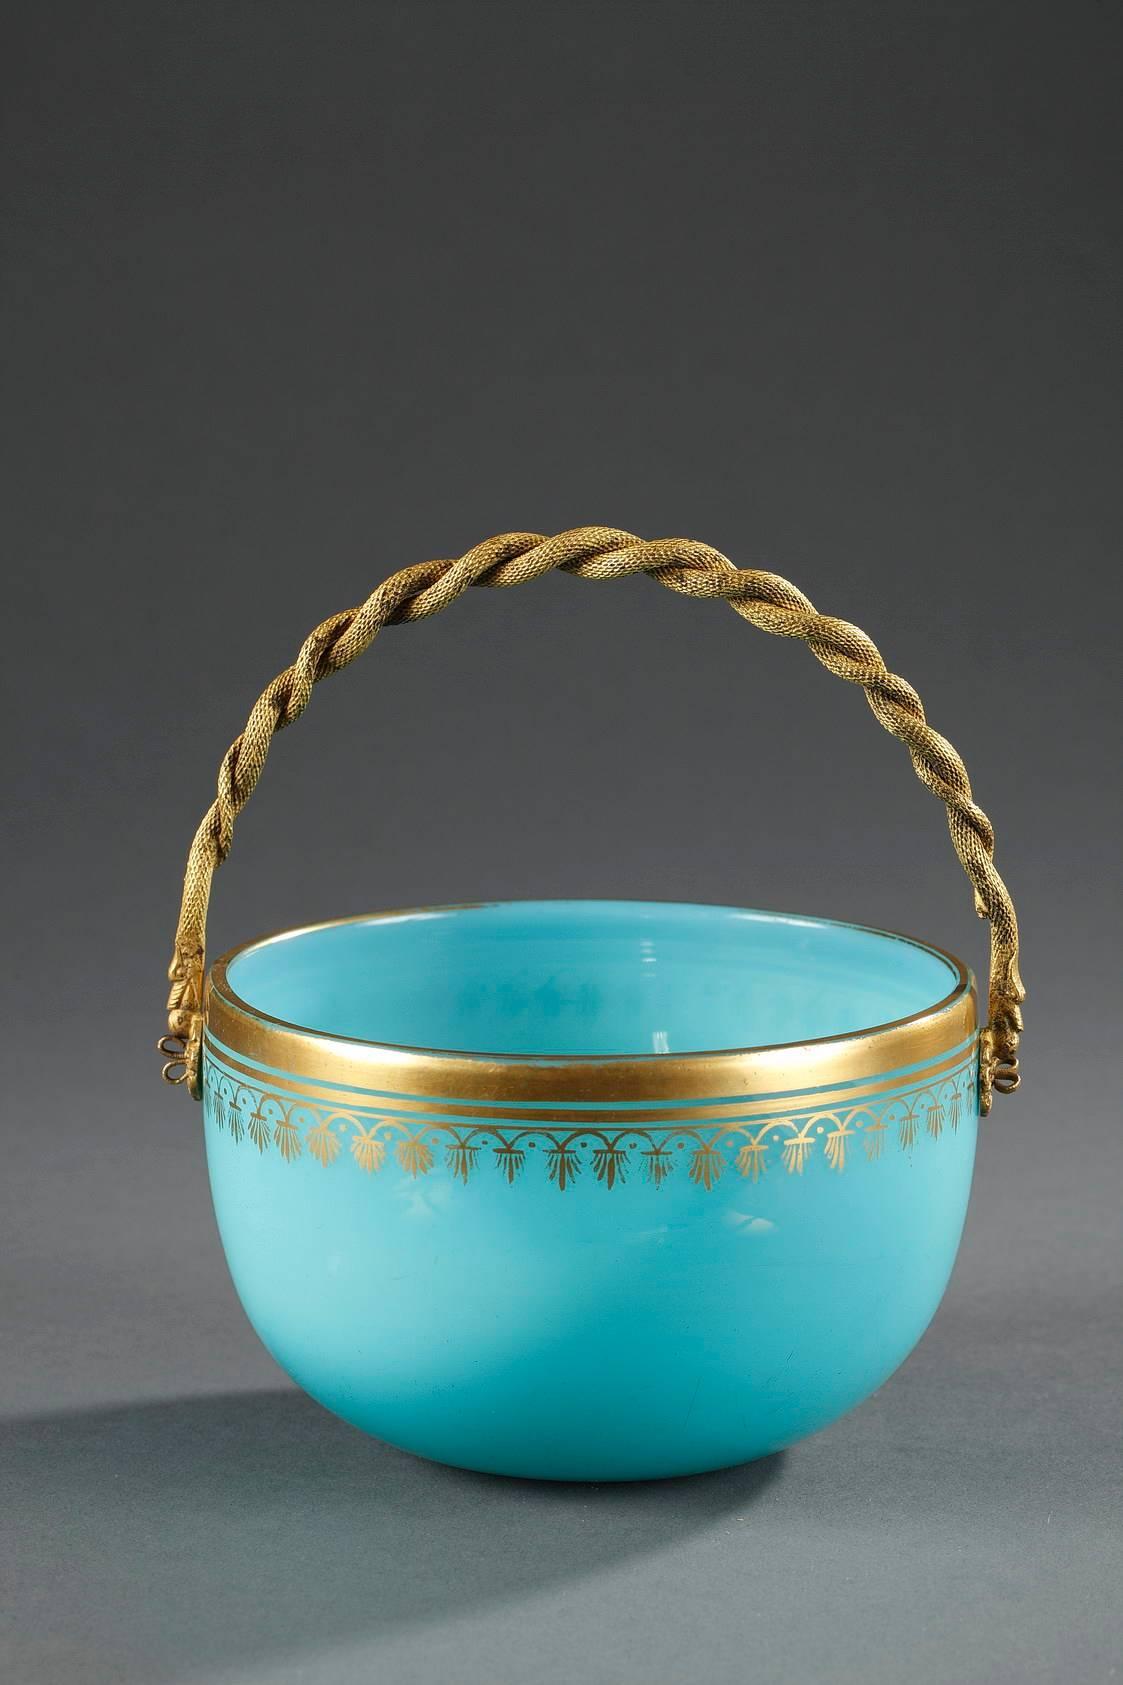 Basket-shaped cup in blue opaline decorated with gilded festoons and stripes. The gilded and sculpted bronze handle is in the shape of two intertwined snakes. Intricate chasing work.
 Charles X period,

circa 1820
Dimension W 5.1 in, D 4.7in, H